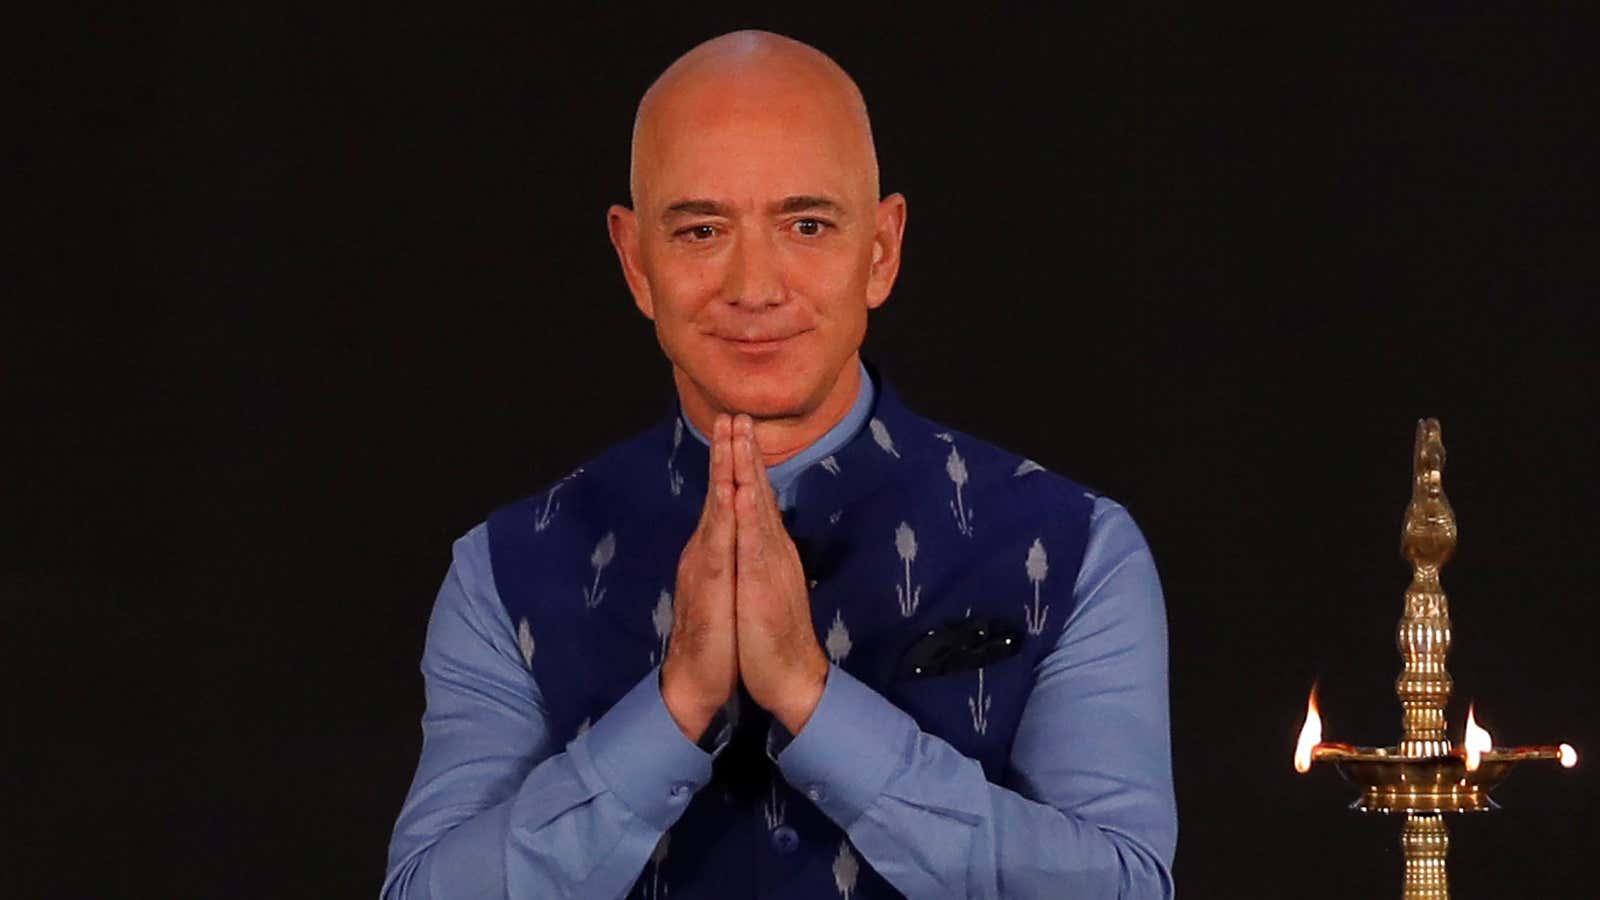 Amazon CEO Jeff Bezos at a company event in India in January 2020.